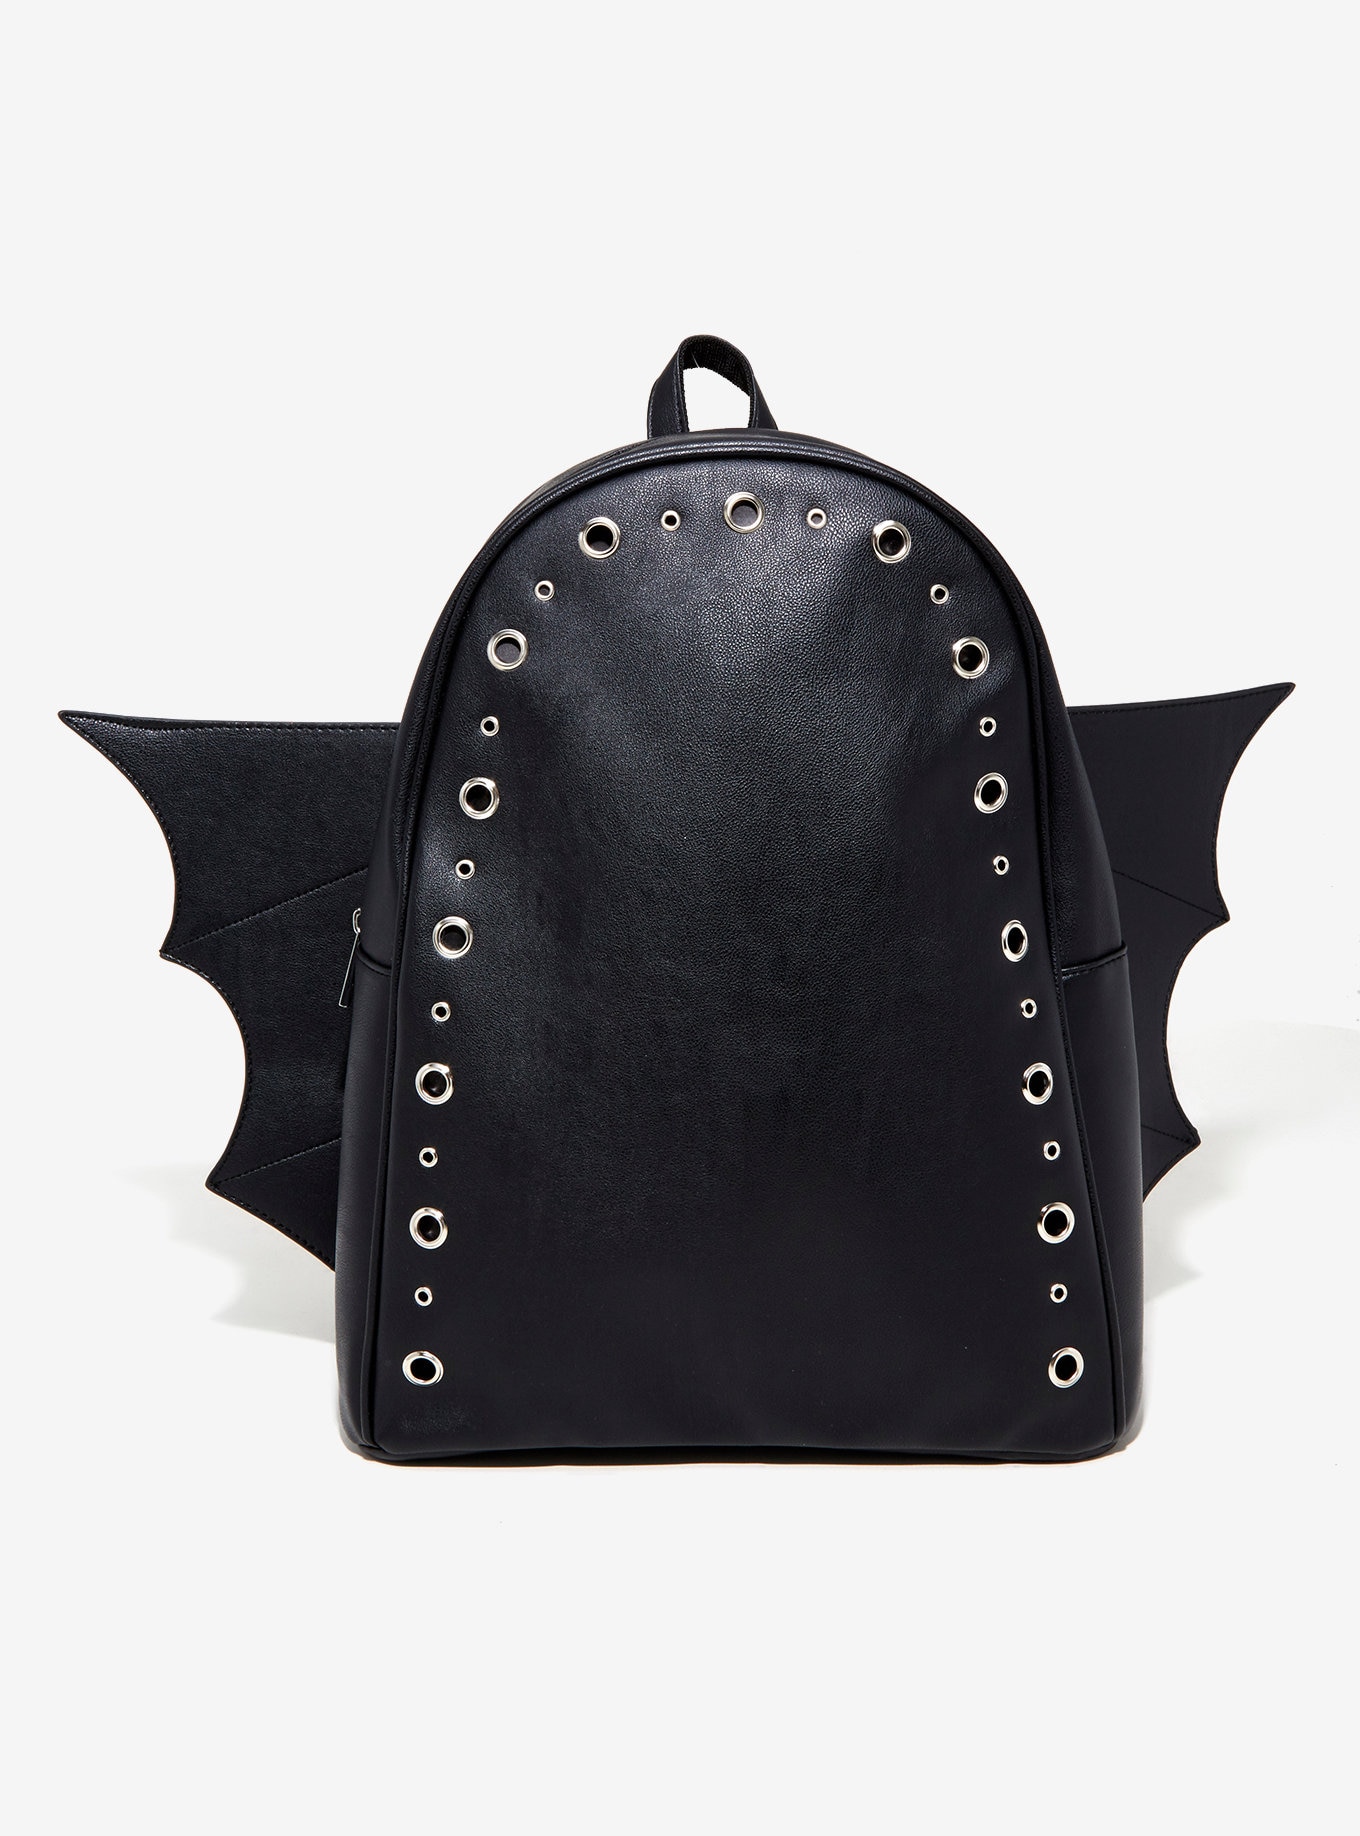 Gothic Lolita Black Bat Backpack With Wings Bag